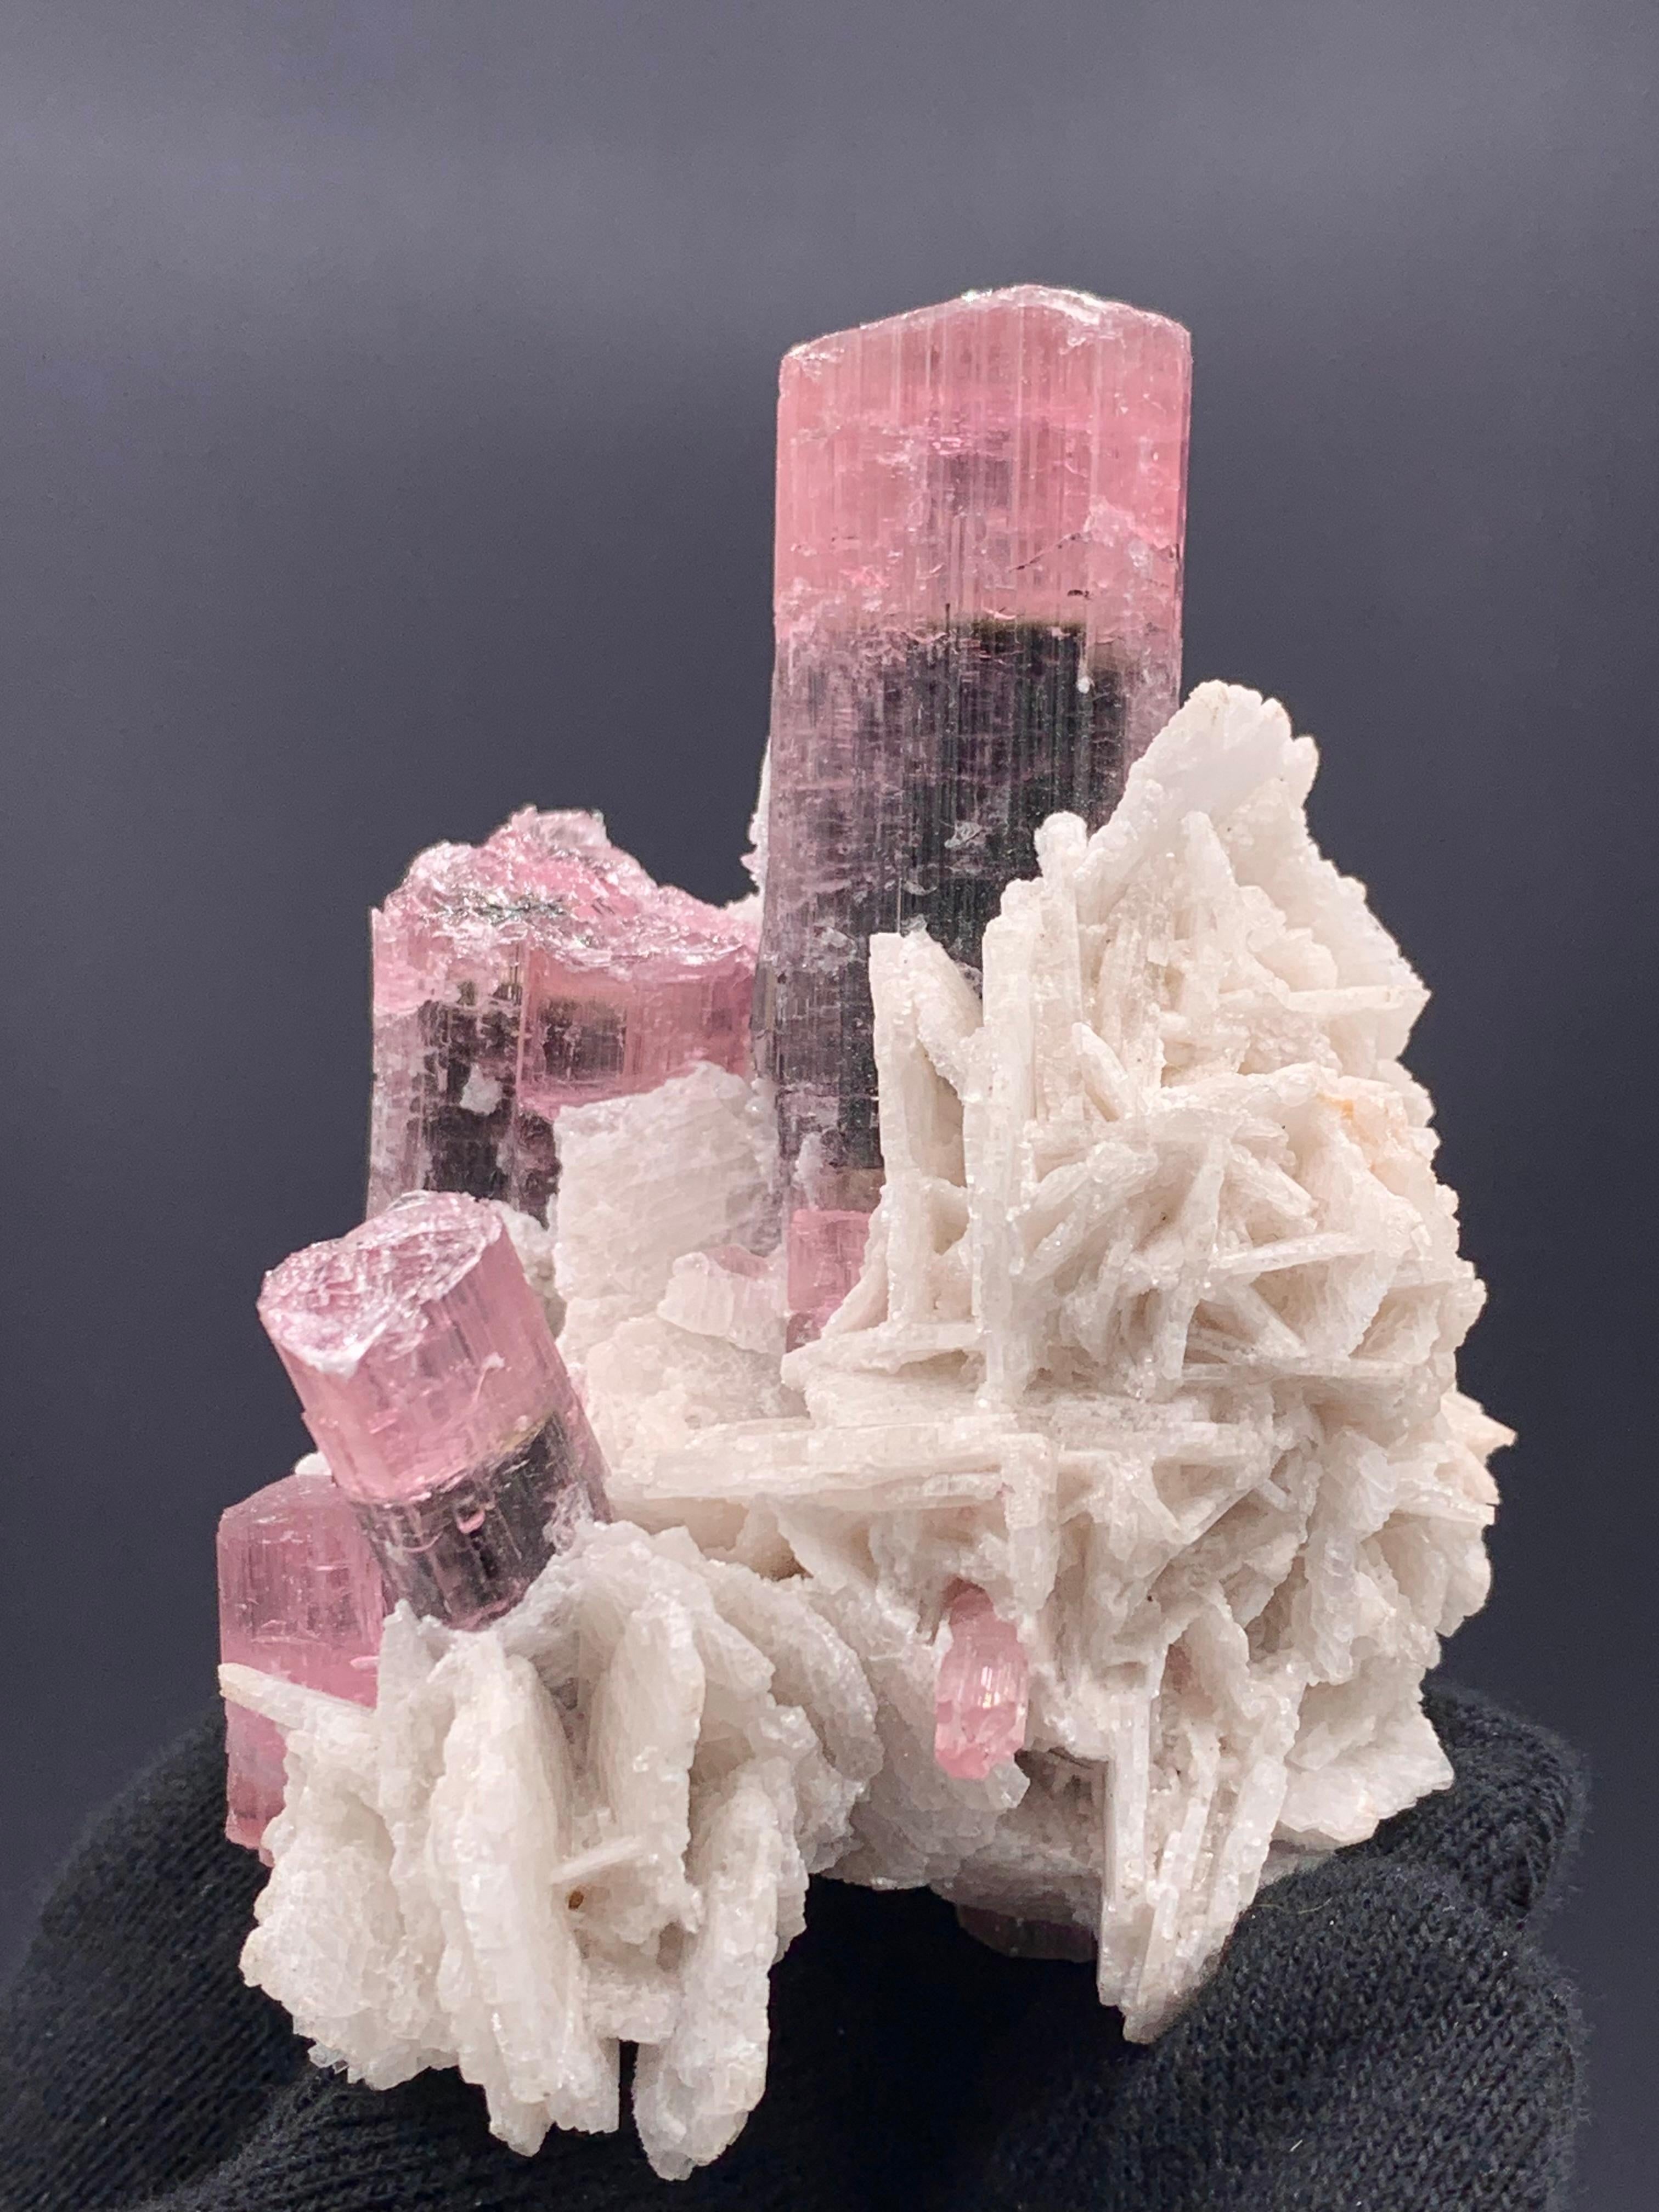 136.98 Gram Beautiful Bi Color Tourmaline Specimen From Skardu, Pakistan 

Weight: 136.98 Gram 
Dimension: 7.3 x 5.4 x 6.3 Cm
Origin: Skardu, Pakistan 

Tourmaline is a crystalline silicate mineral group in which boron is compounded with elements